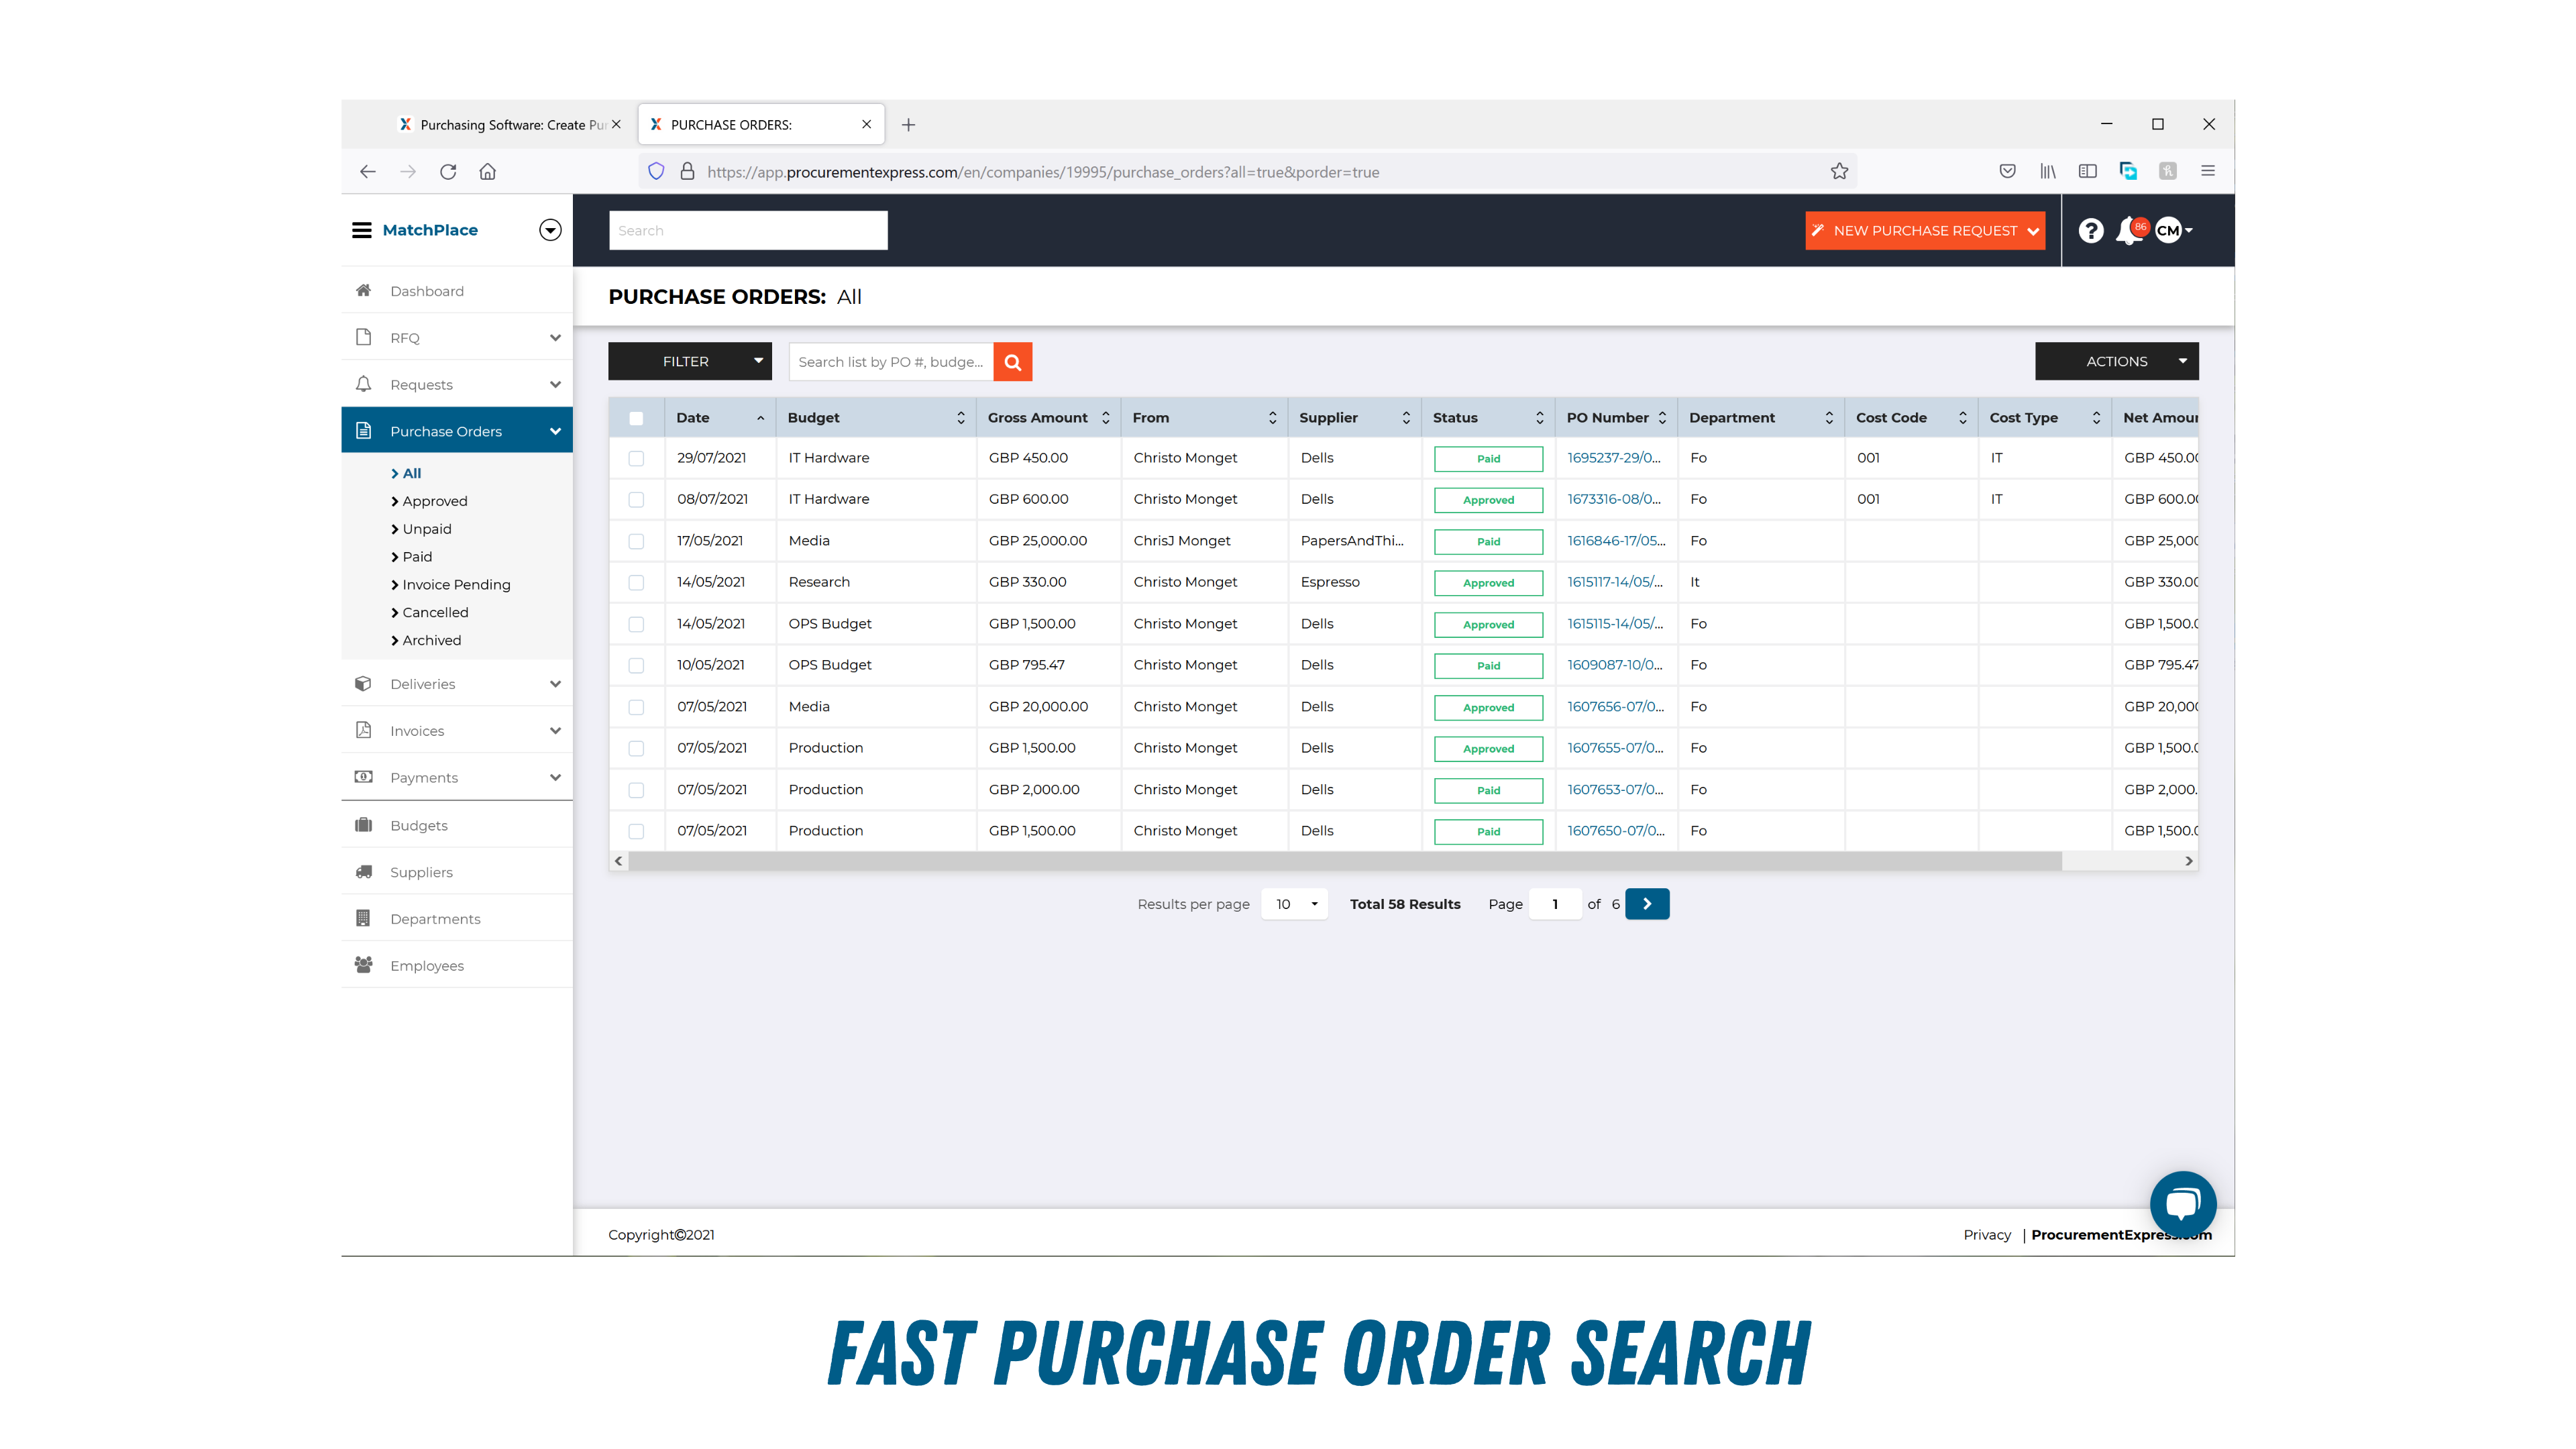 Fast Purchase Order Search